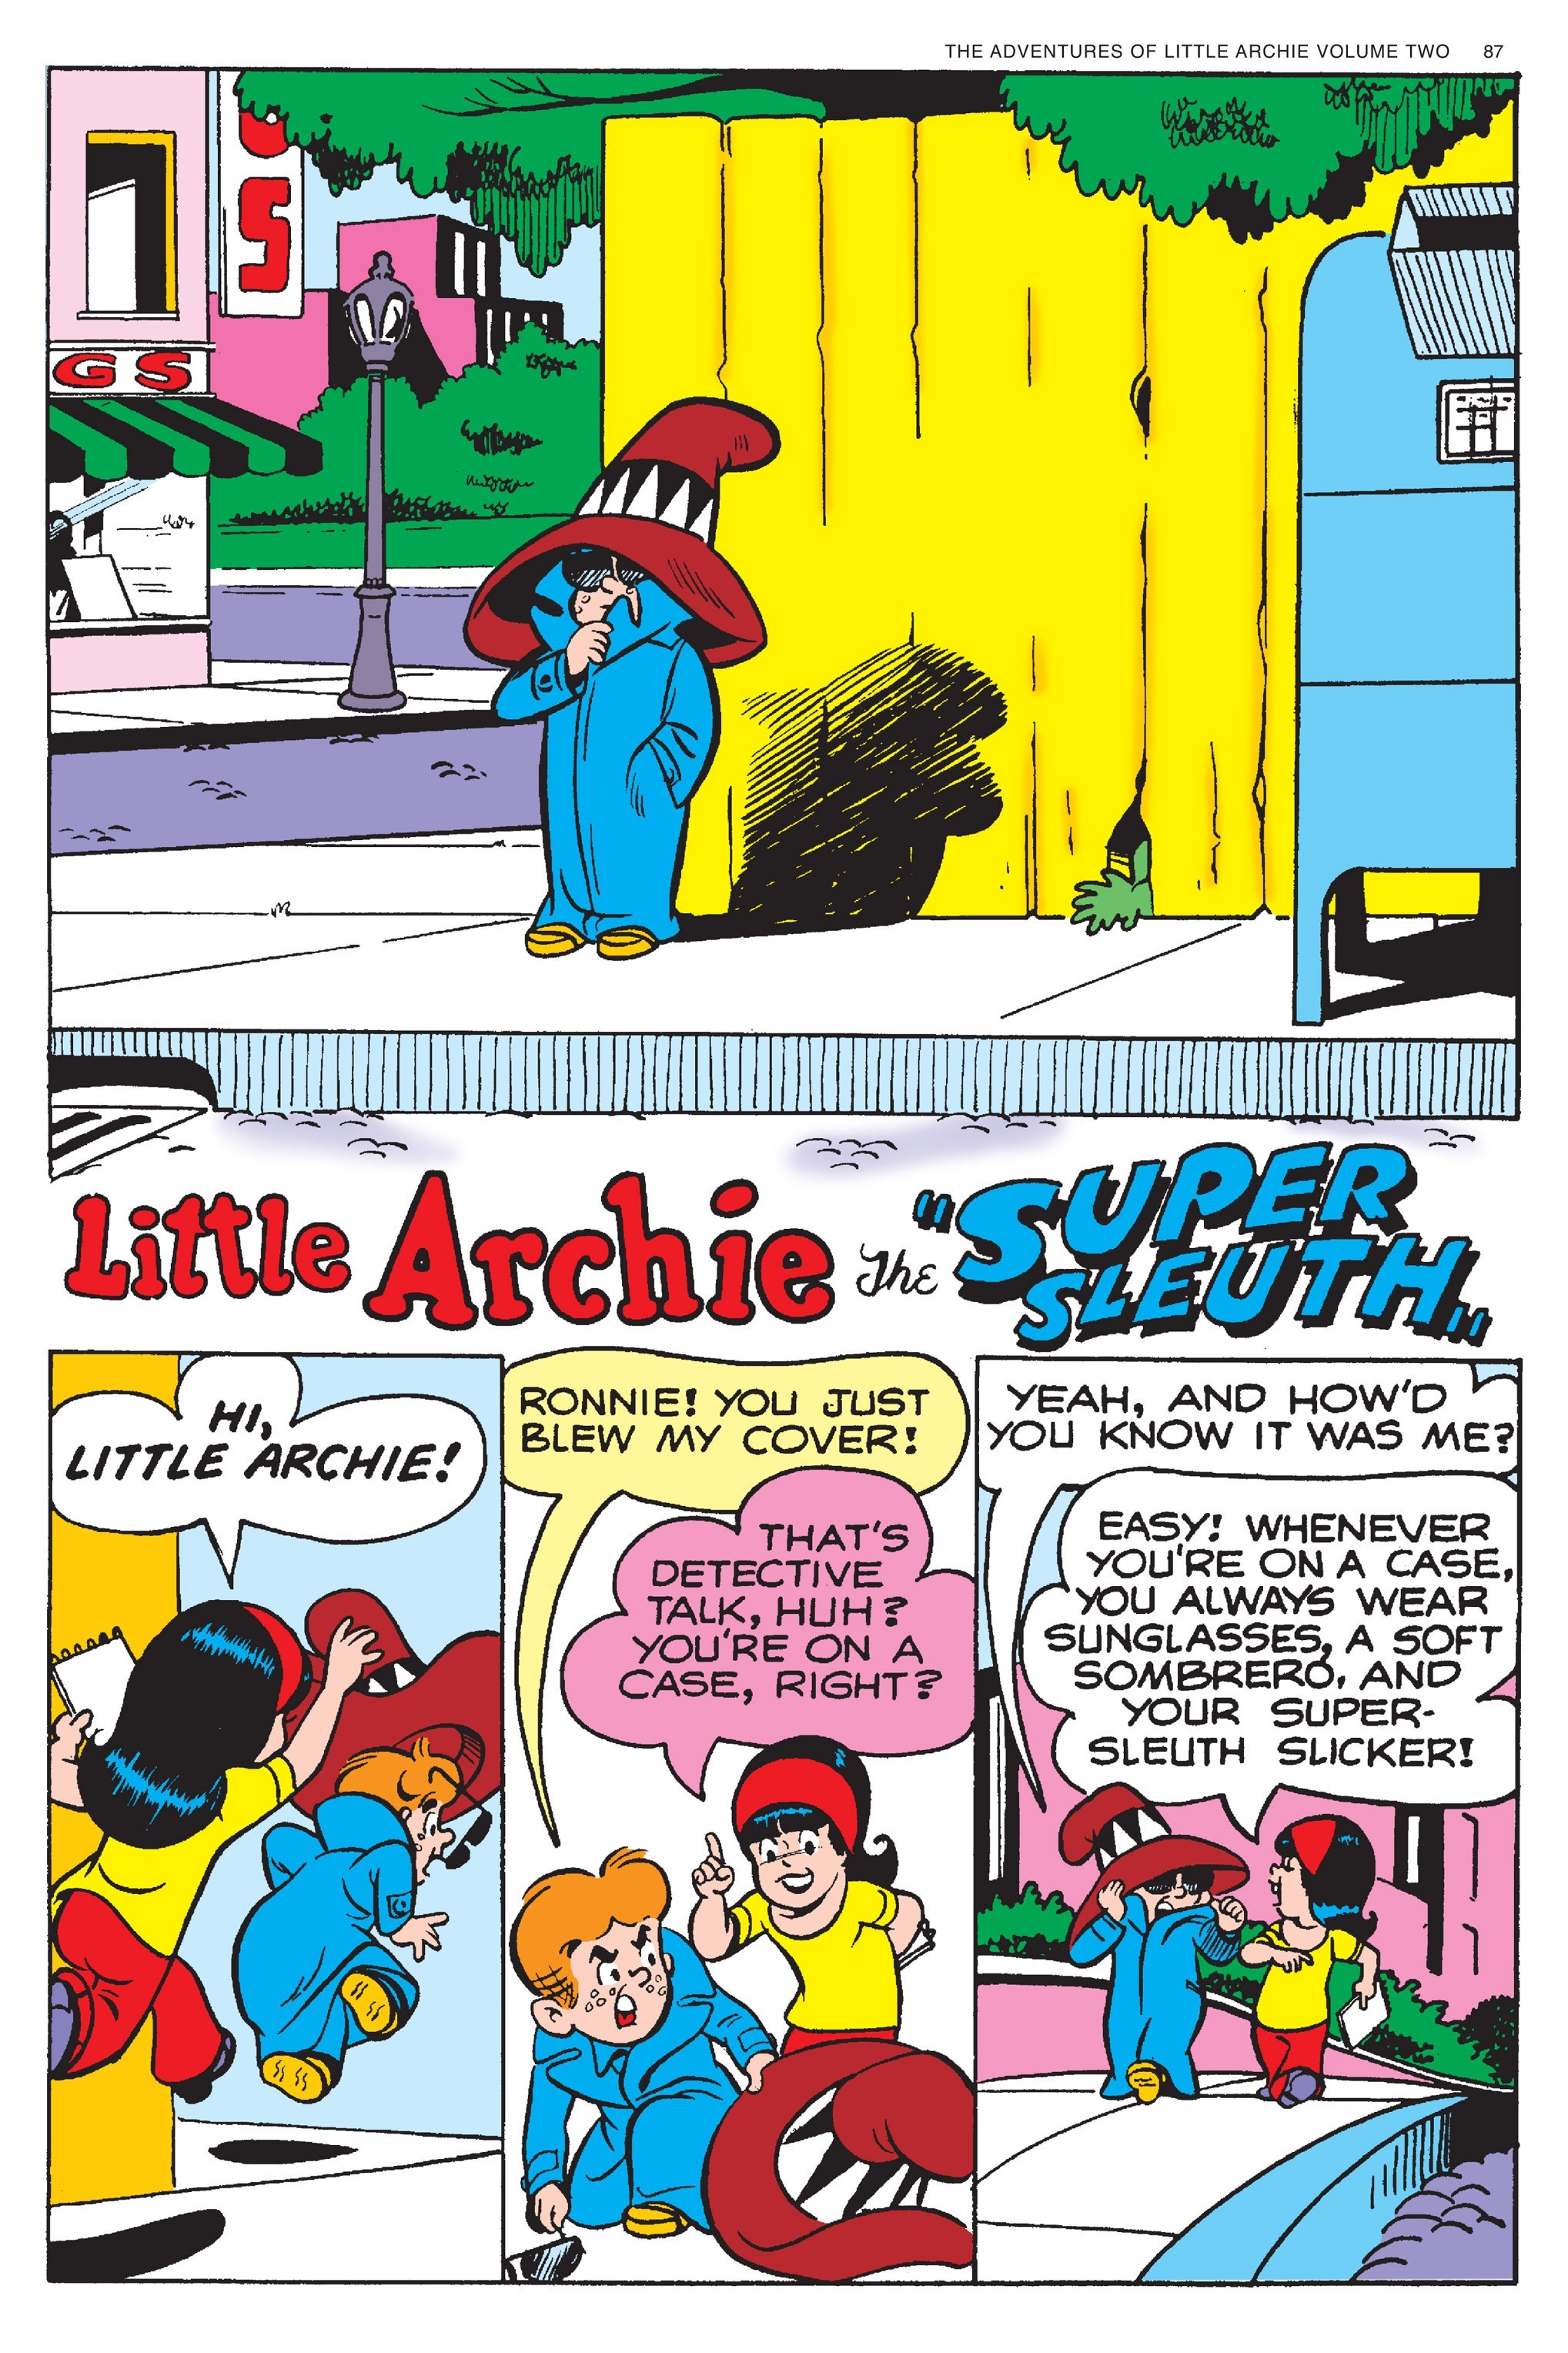 Read online Adventures of Little Archie comic -  Issue # TPB 2 - 88